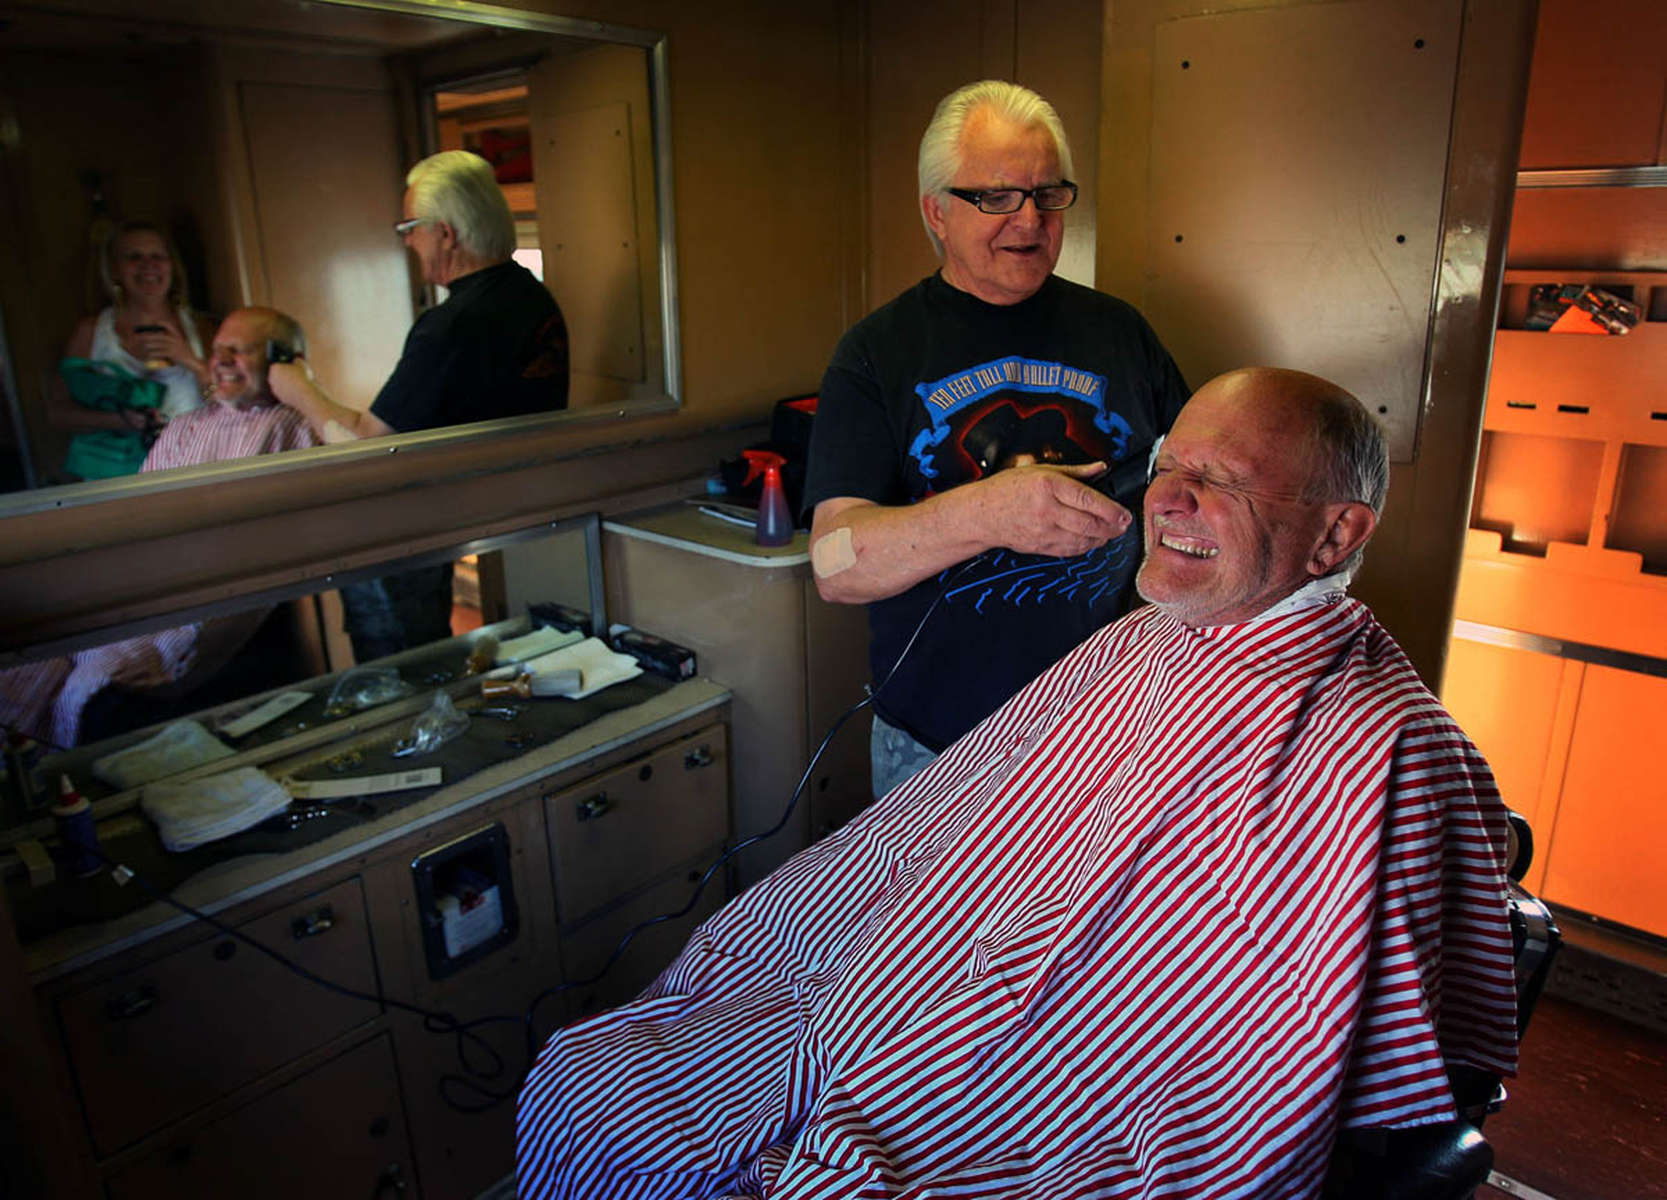 Carl Hunt, a Barstow barber for 47 years, hopes he doesn't cut anything but hair from Wayne Soppelandas the train rocks back and forth on the tracks. Hunt offered to cut hair on the 1949 Overland Trail rail car barber shop during the Kelso Flyer train ride.(The Press-Enterprise/ Mark Zaleski)